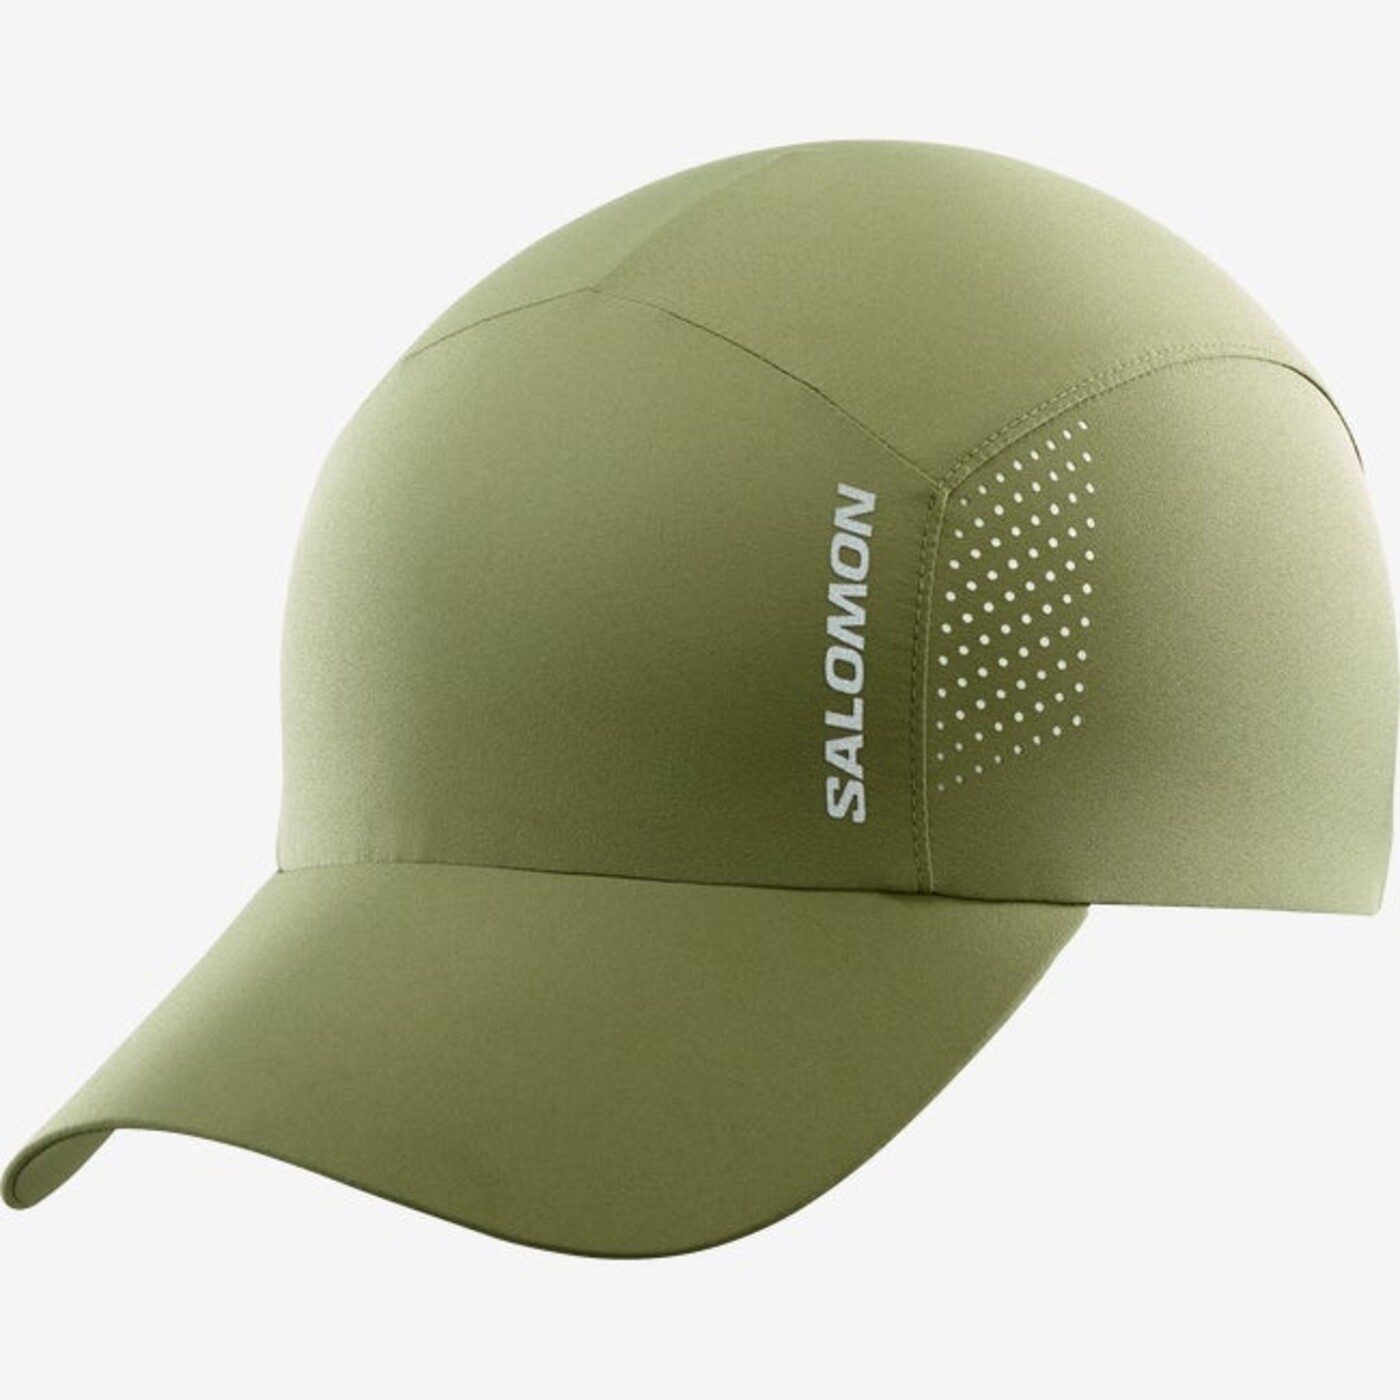 Buy Run Hats and Caps Ireland | Run Shop The Sports Room Wicklow - The ...